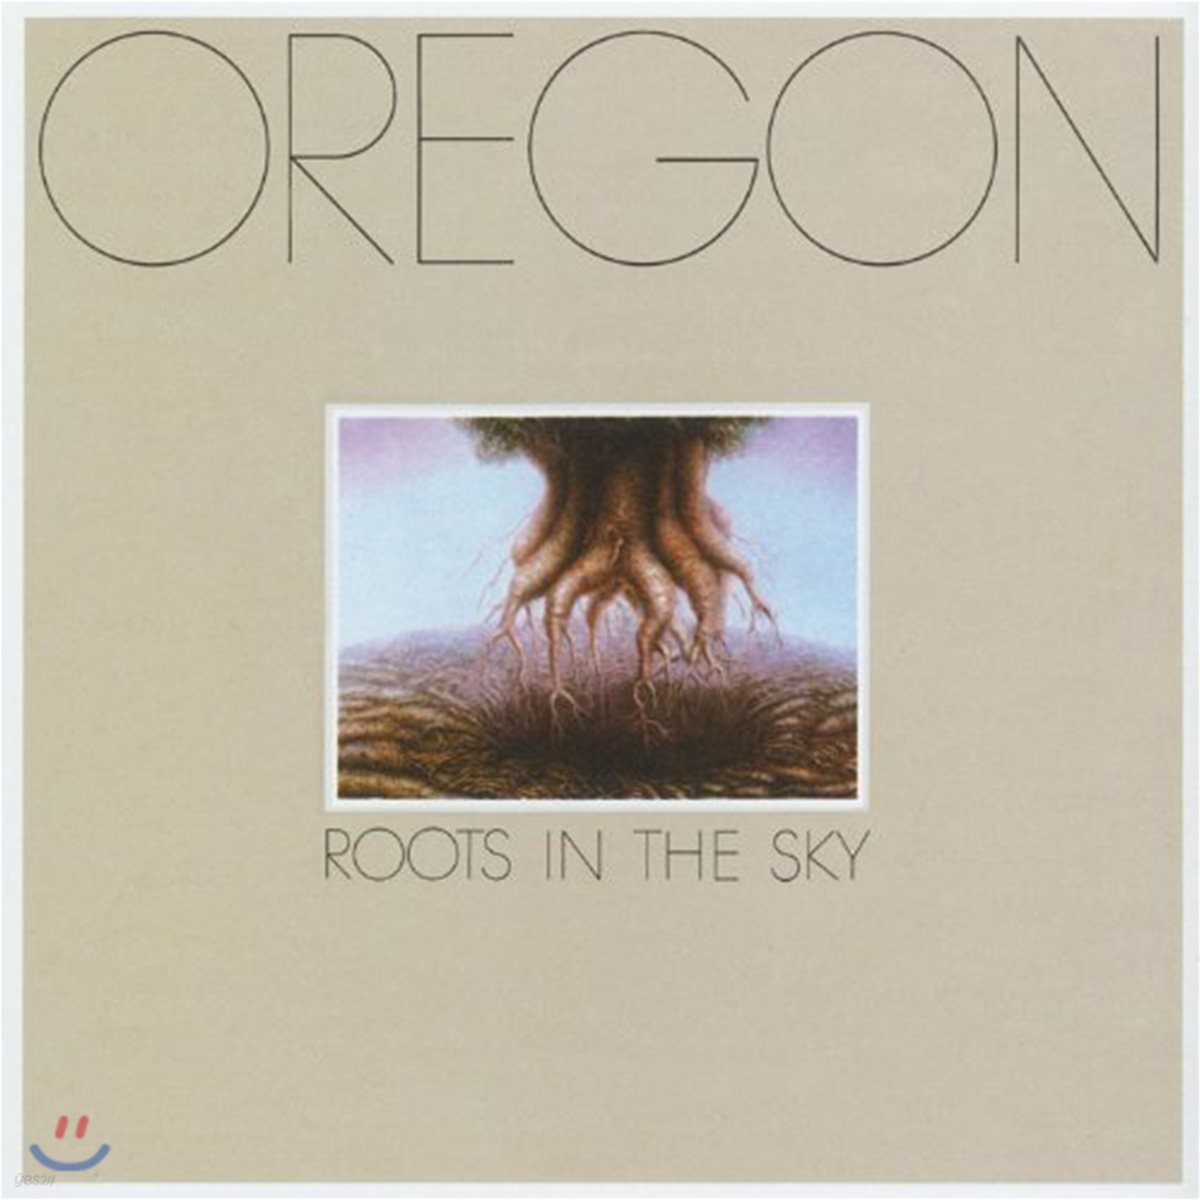 Oregon (오레곤) - Roots In The Sky [LP]